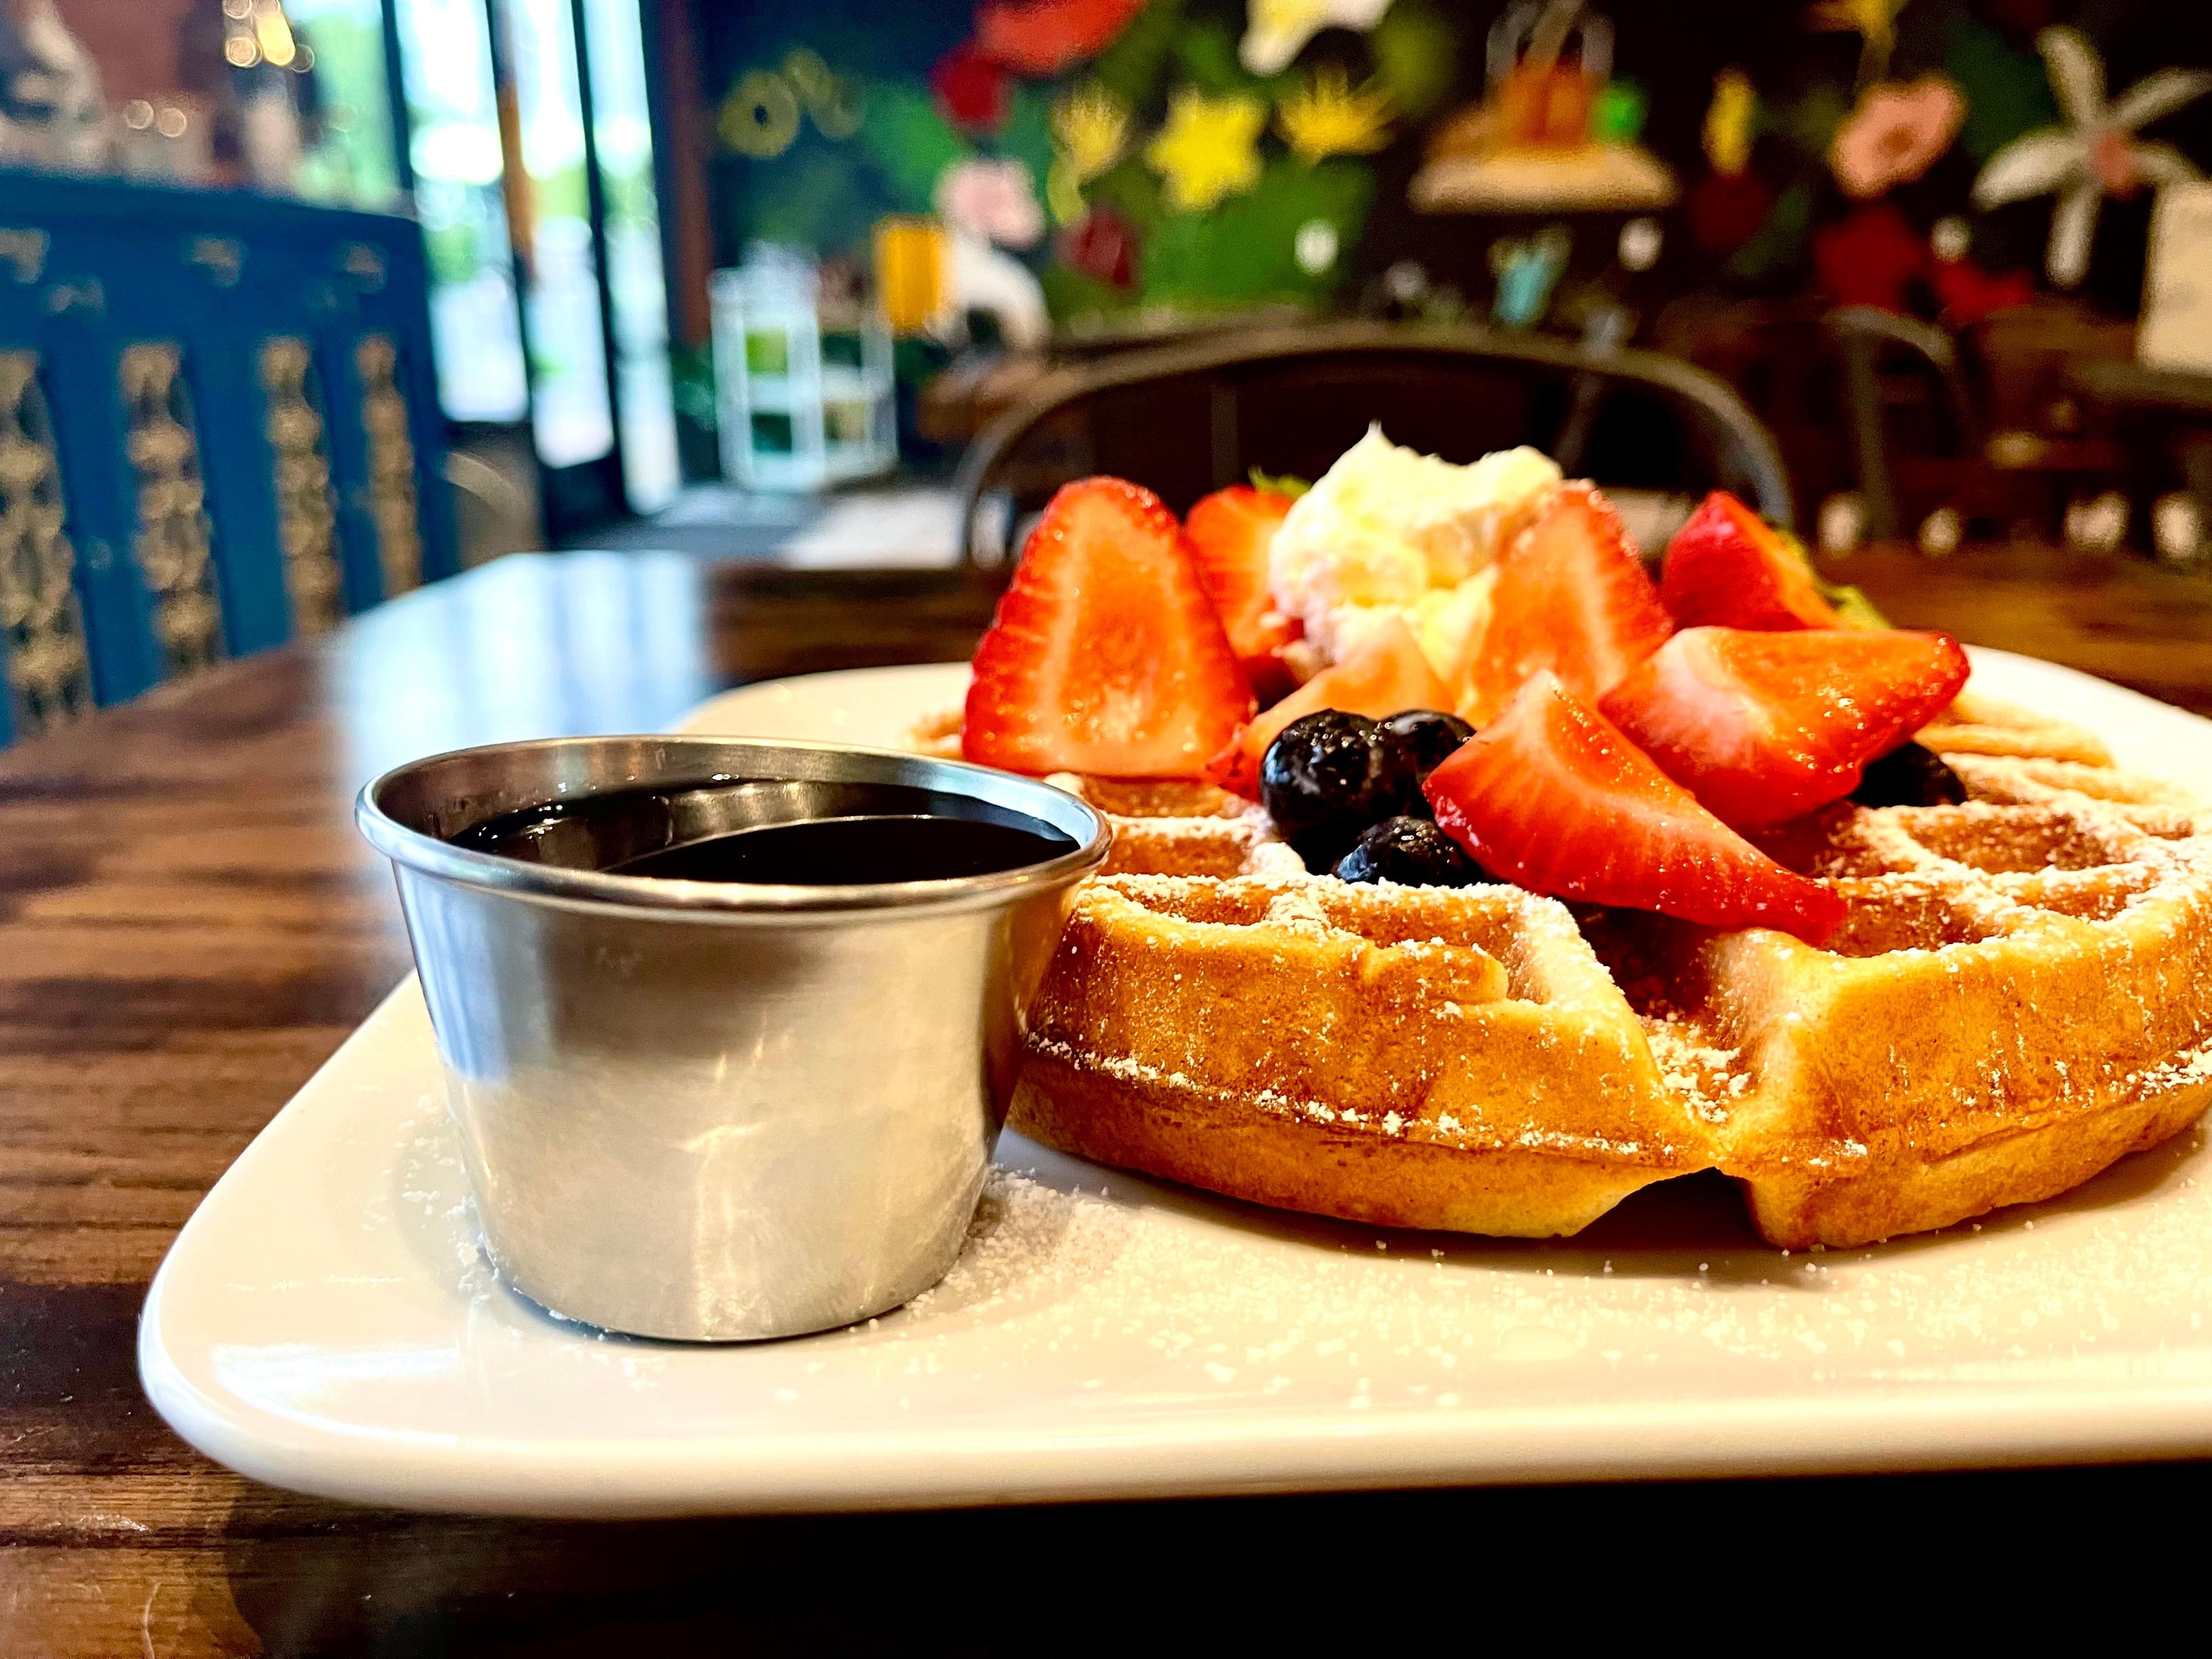 Waffle and Berries